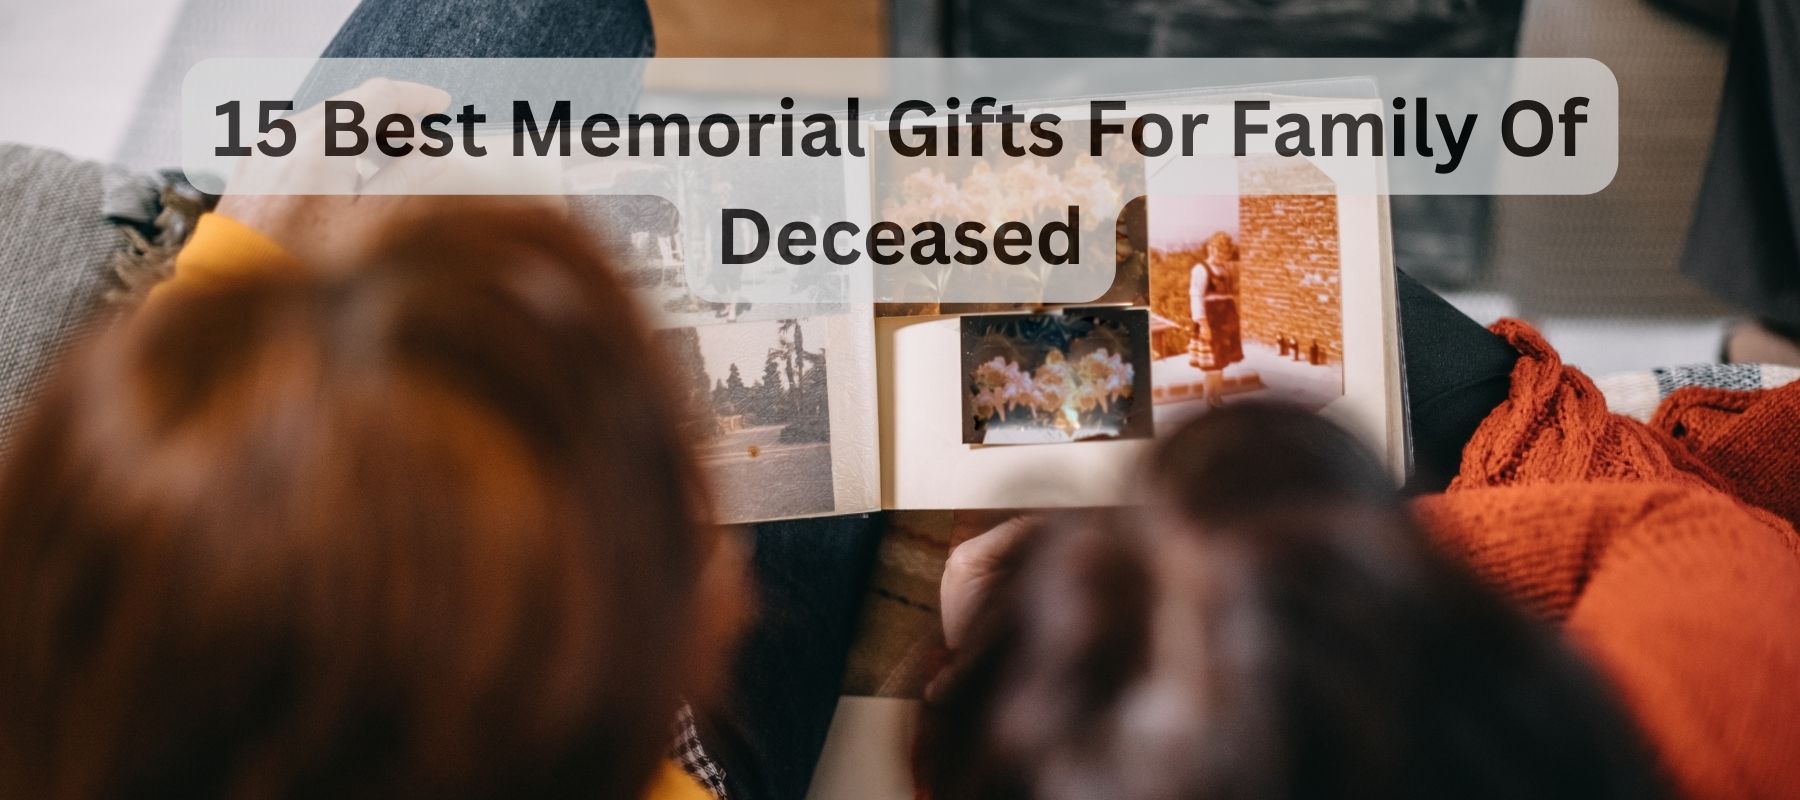 15 Best Memorial Gifts For Family Of Deceased